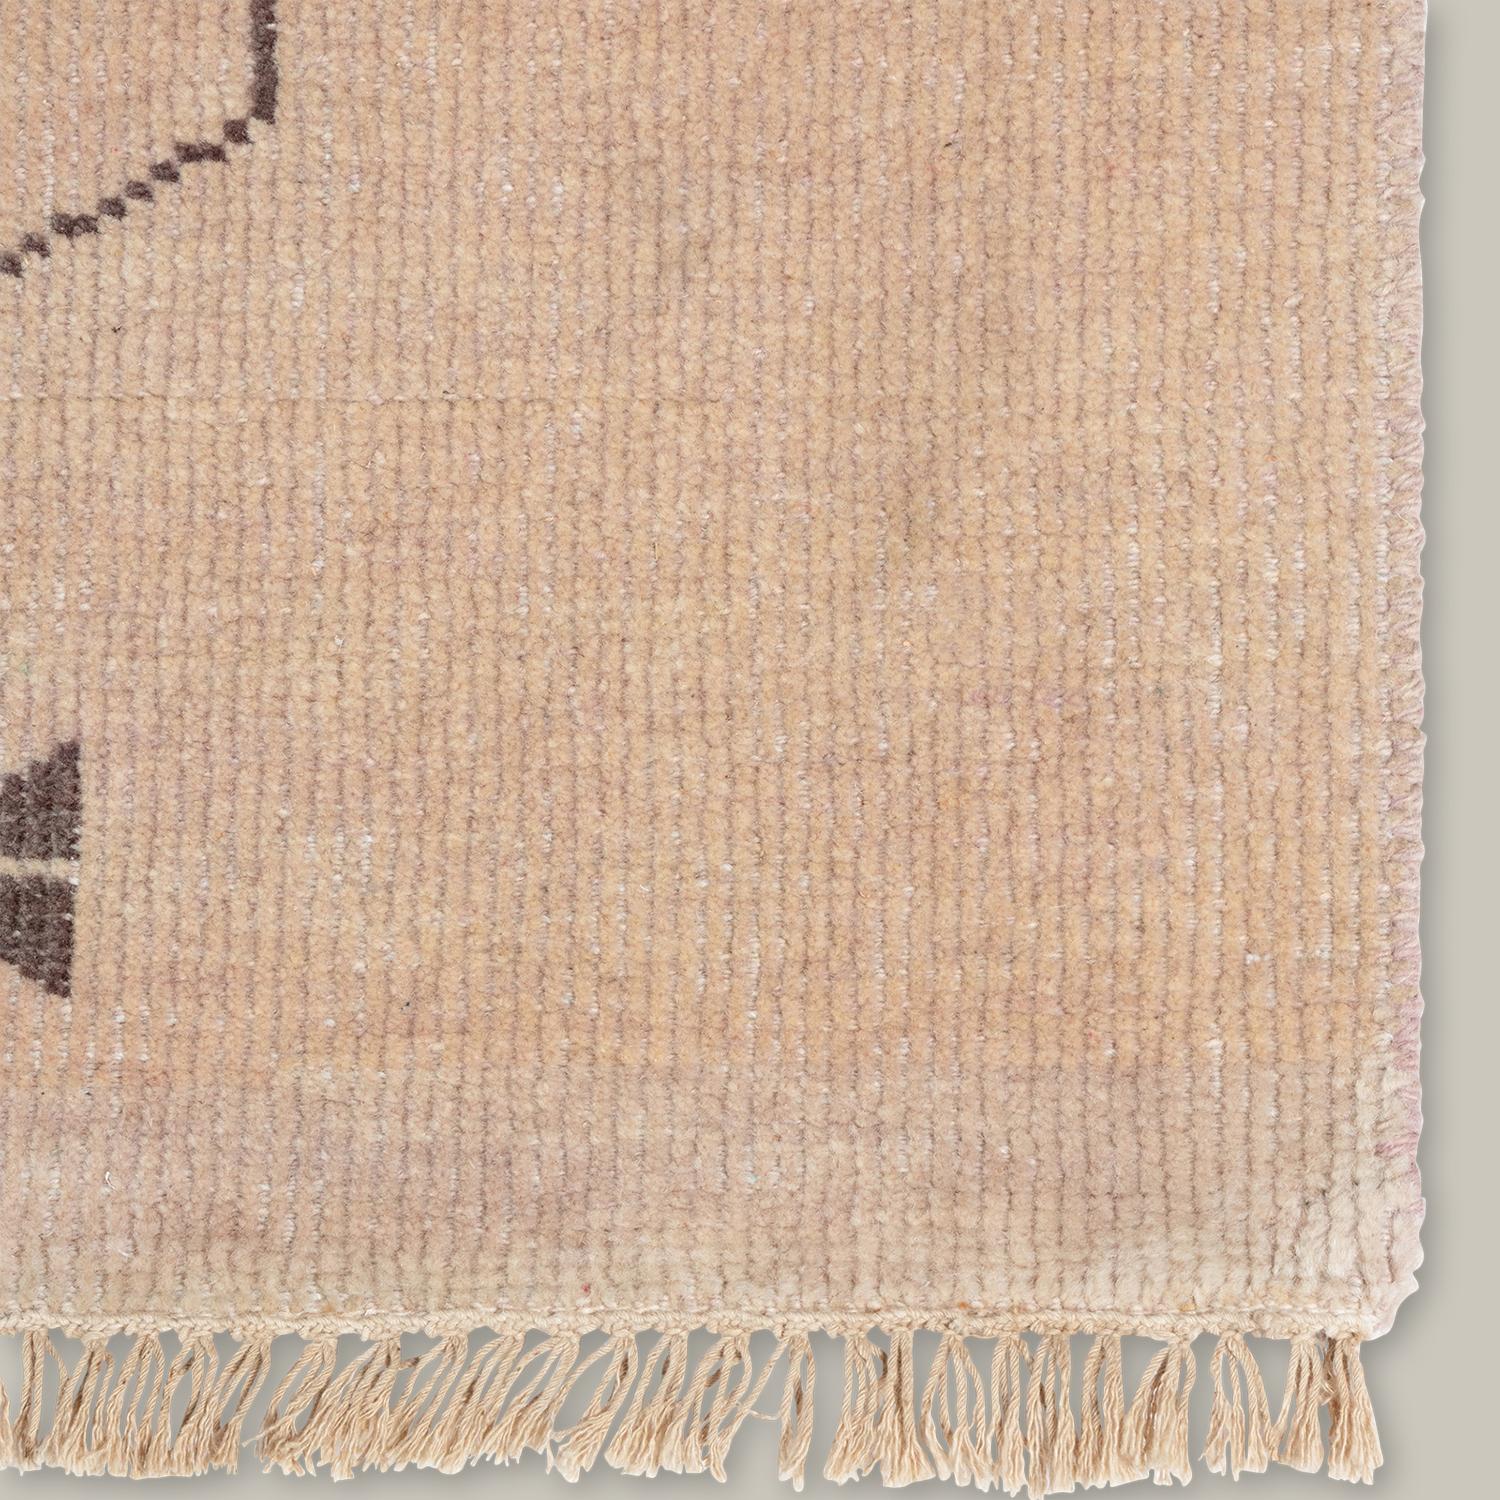 Hand-Woven “Kouang Paffa” Bespoke, Handknotted Rug by Christiane Lemieux For Sale